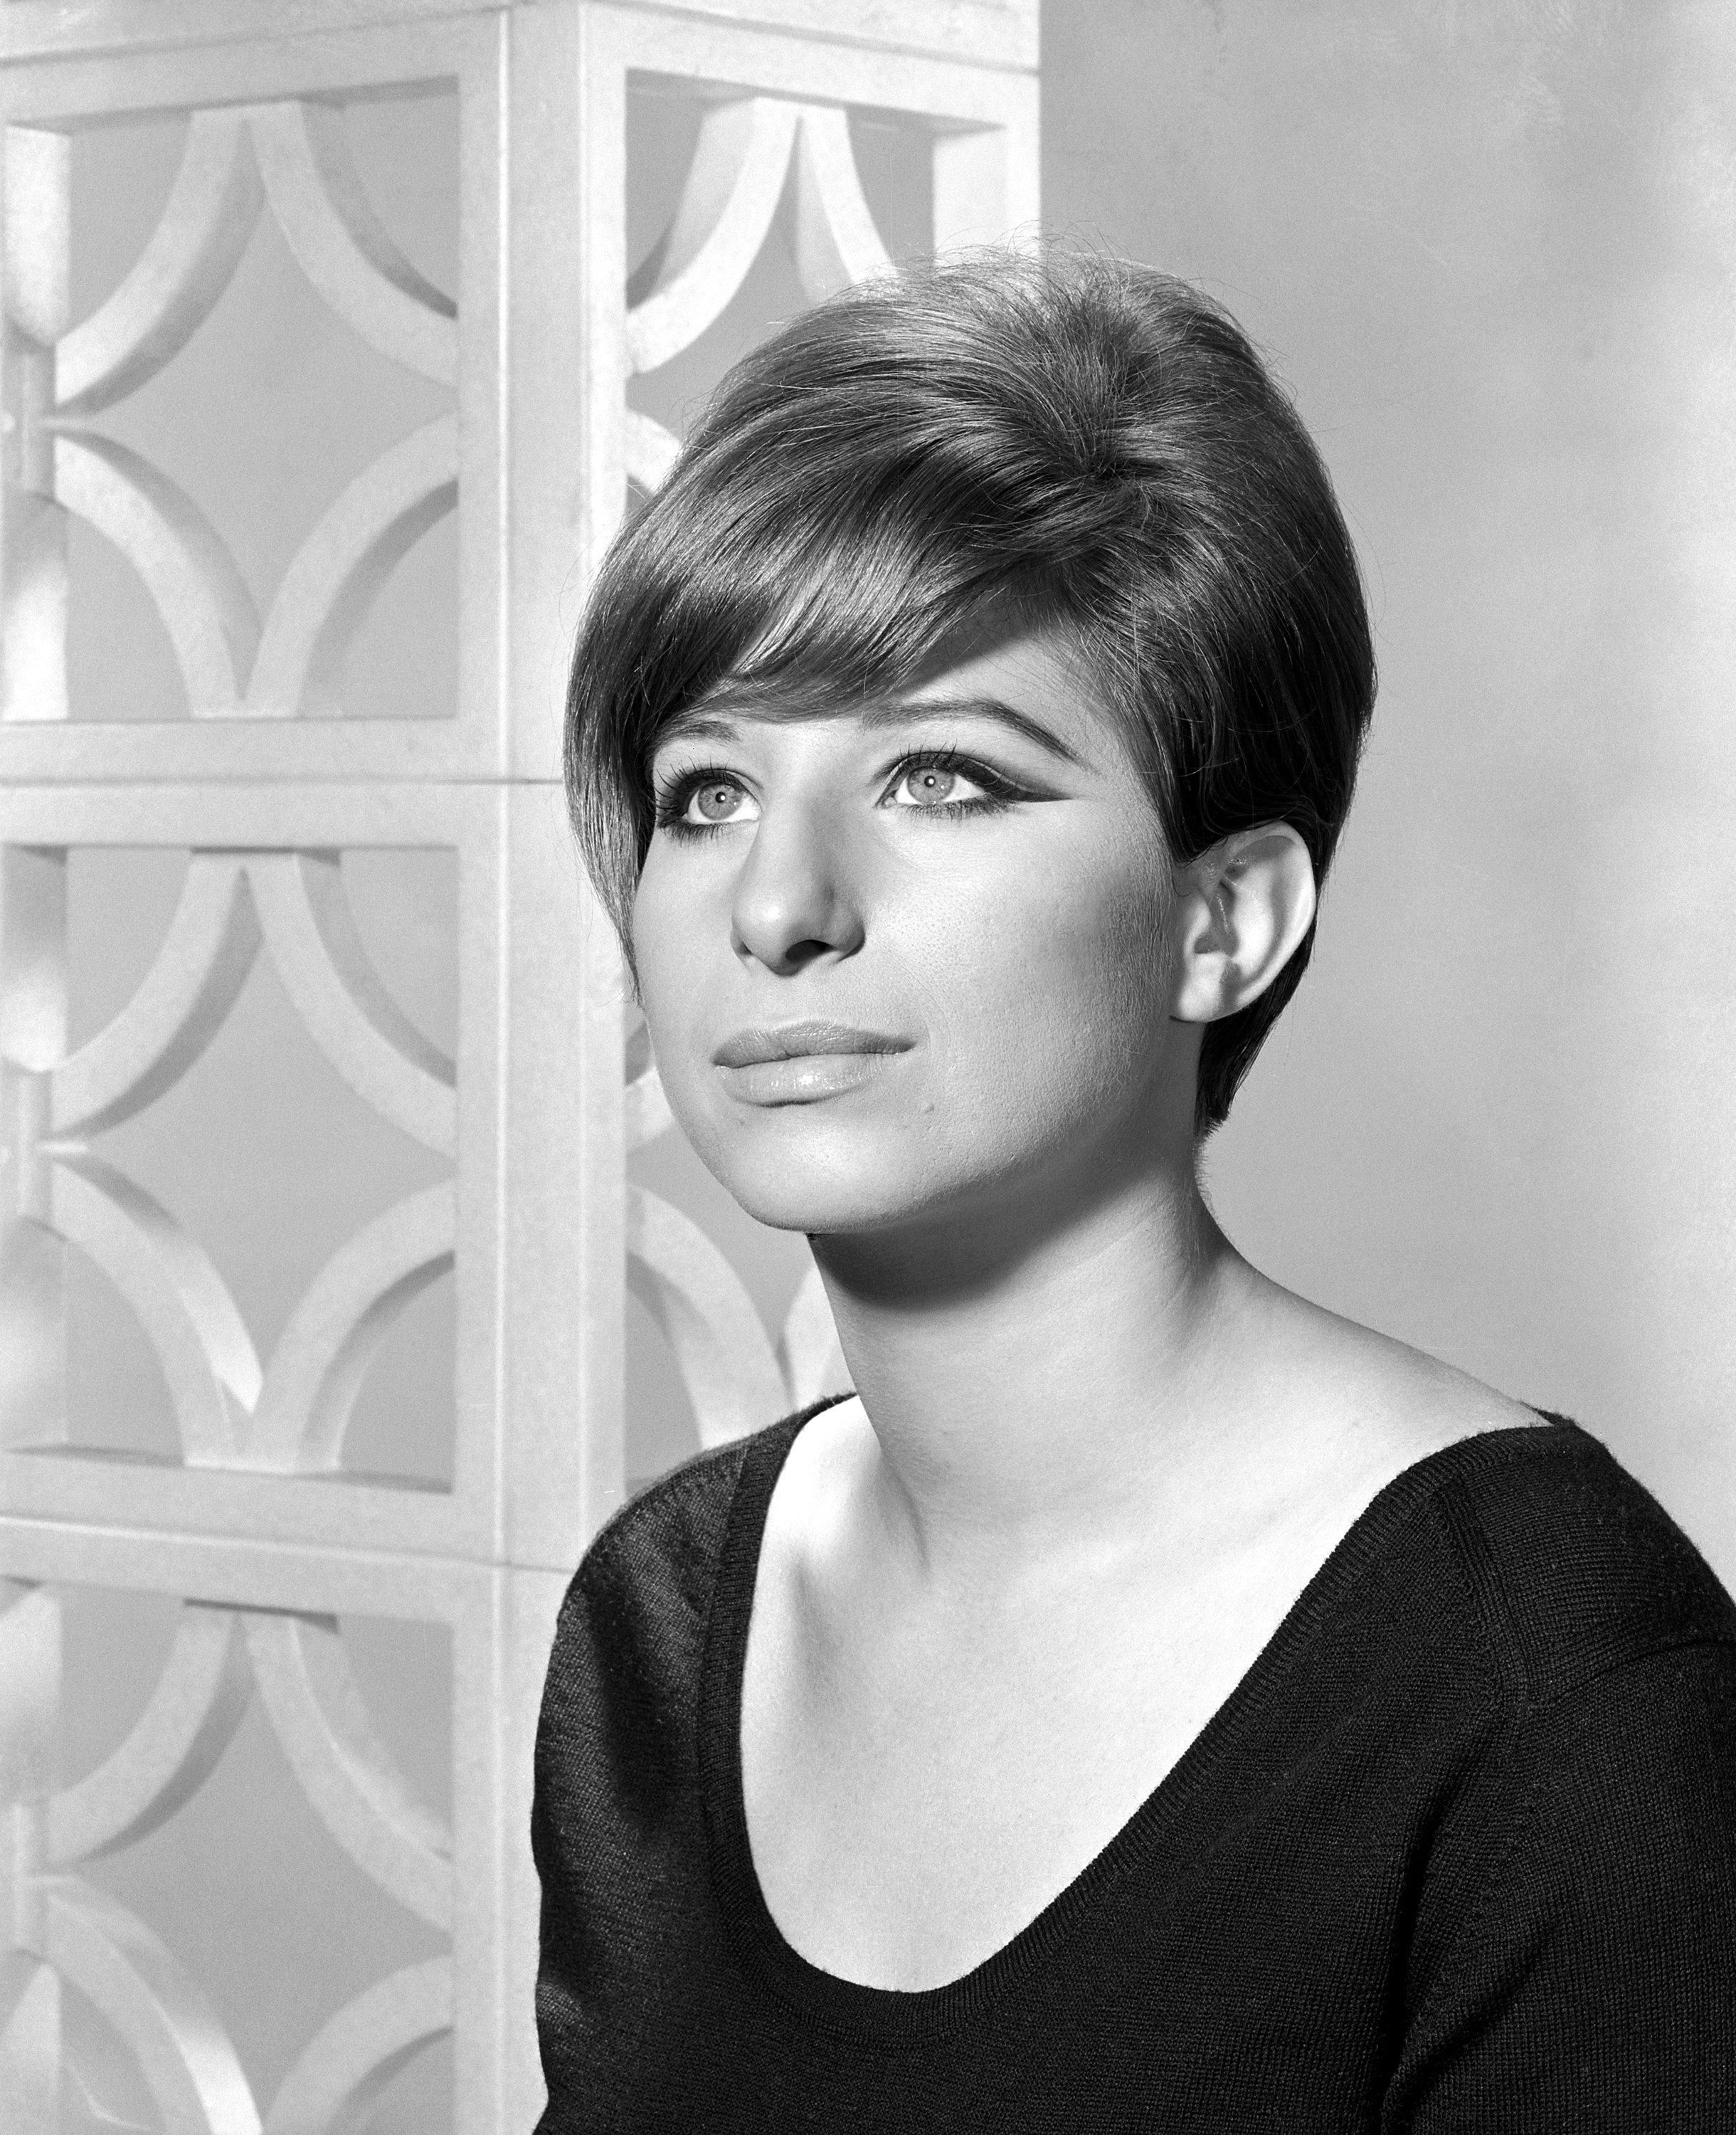 American singer and actress Barbra Streisand with a beehive hairdo, November 10, 1964 | Source: Getty Images